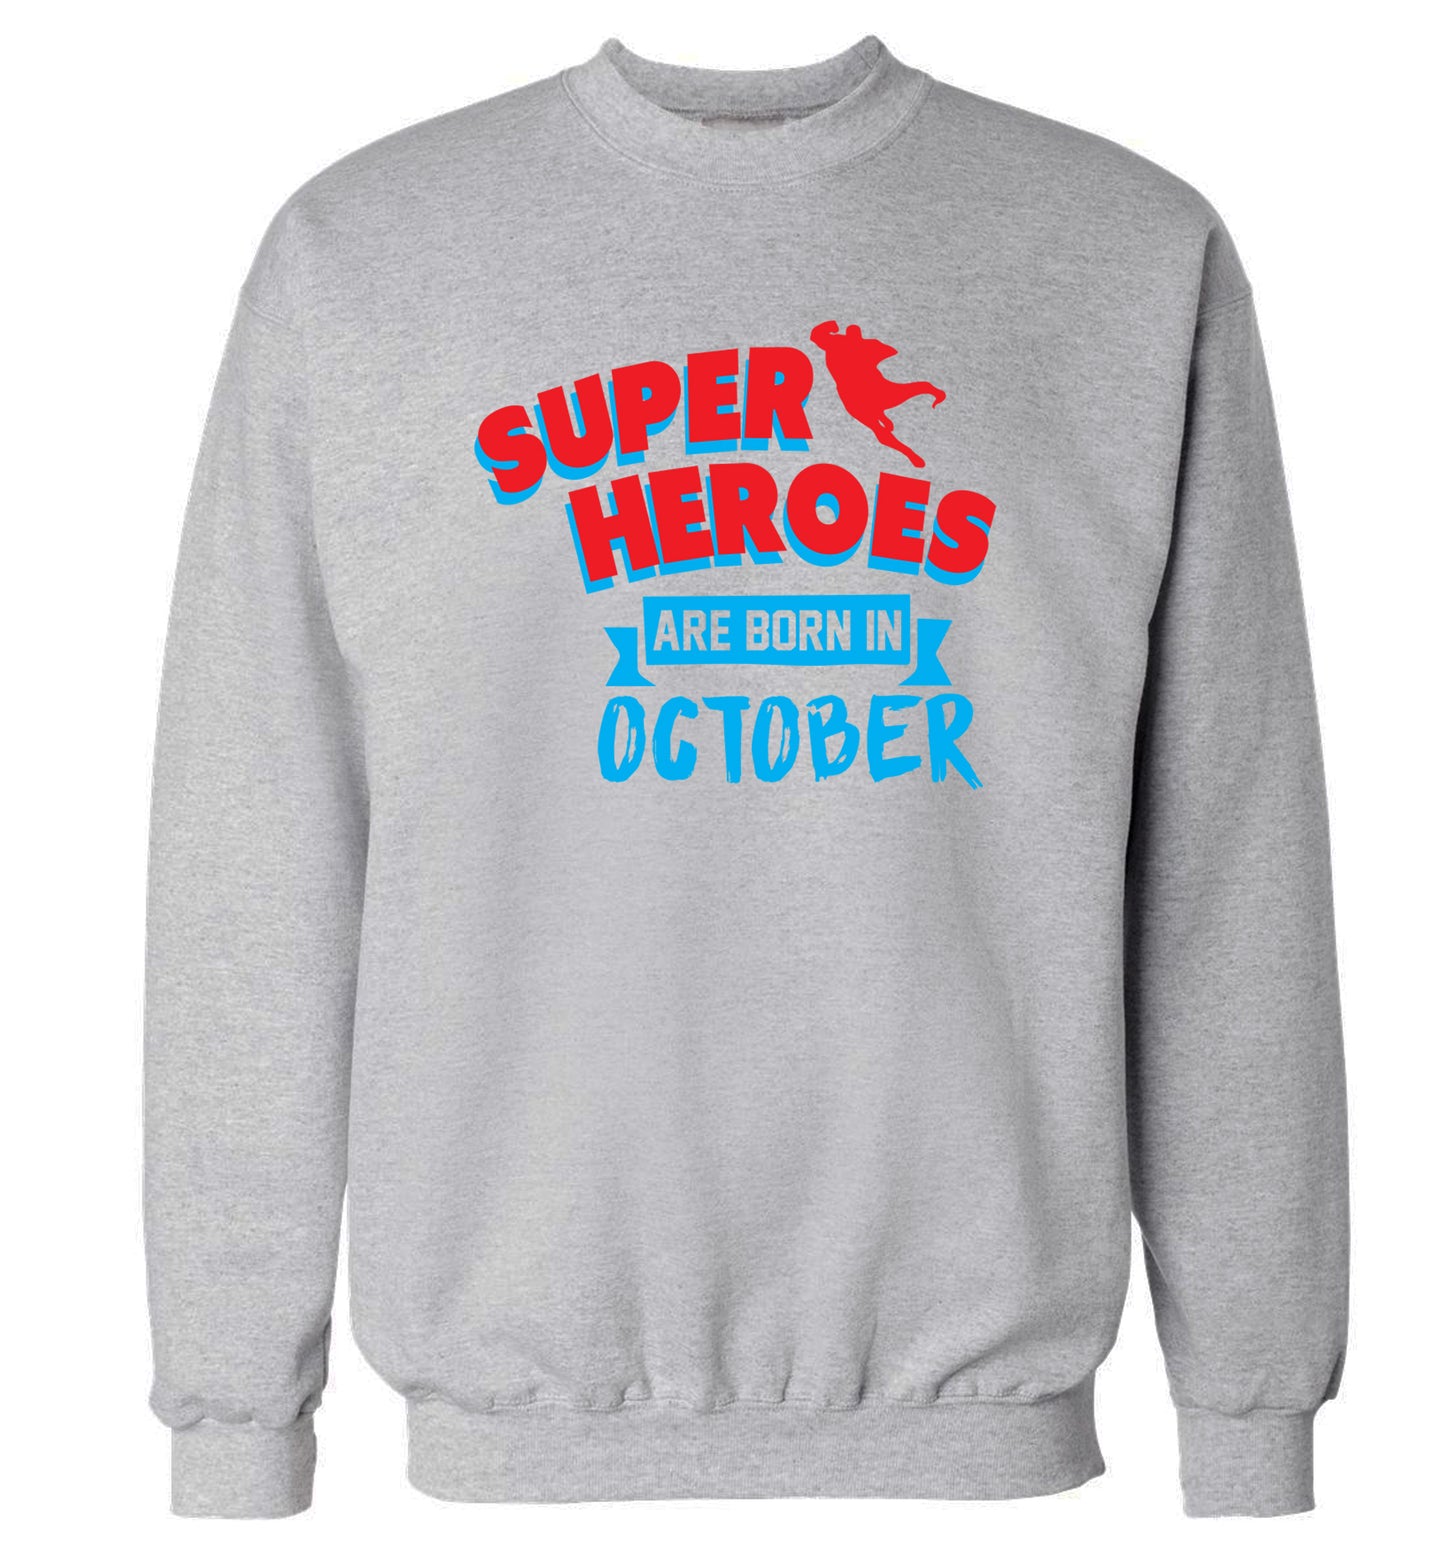 Superheroes are born in October Adult's unisex grey Sweater 2XL